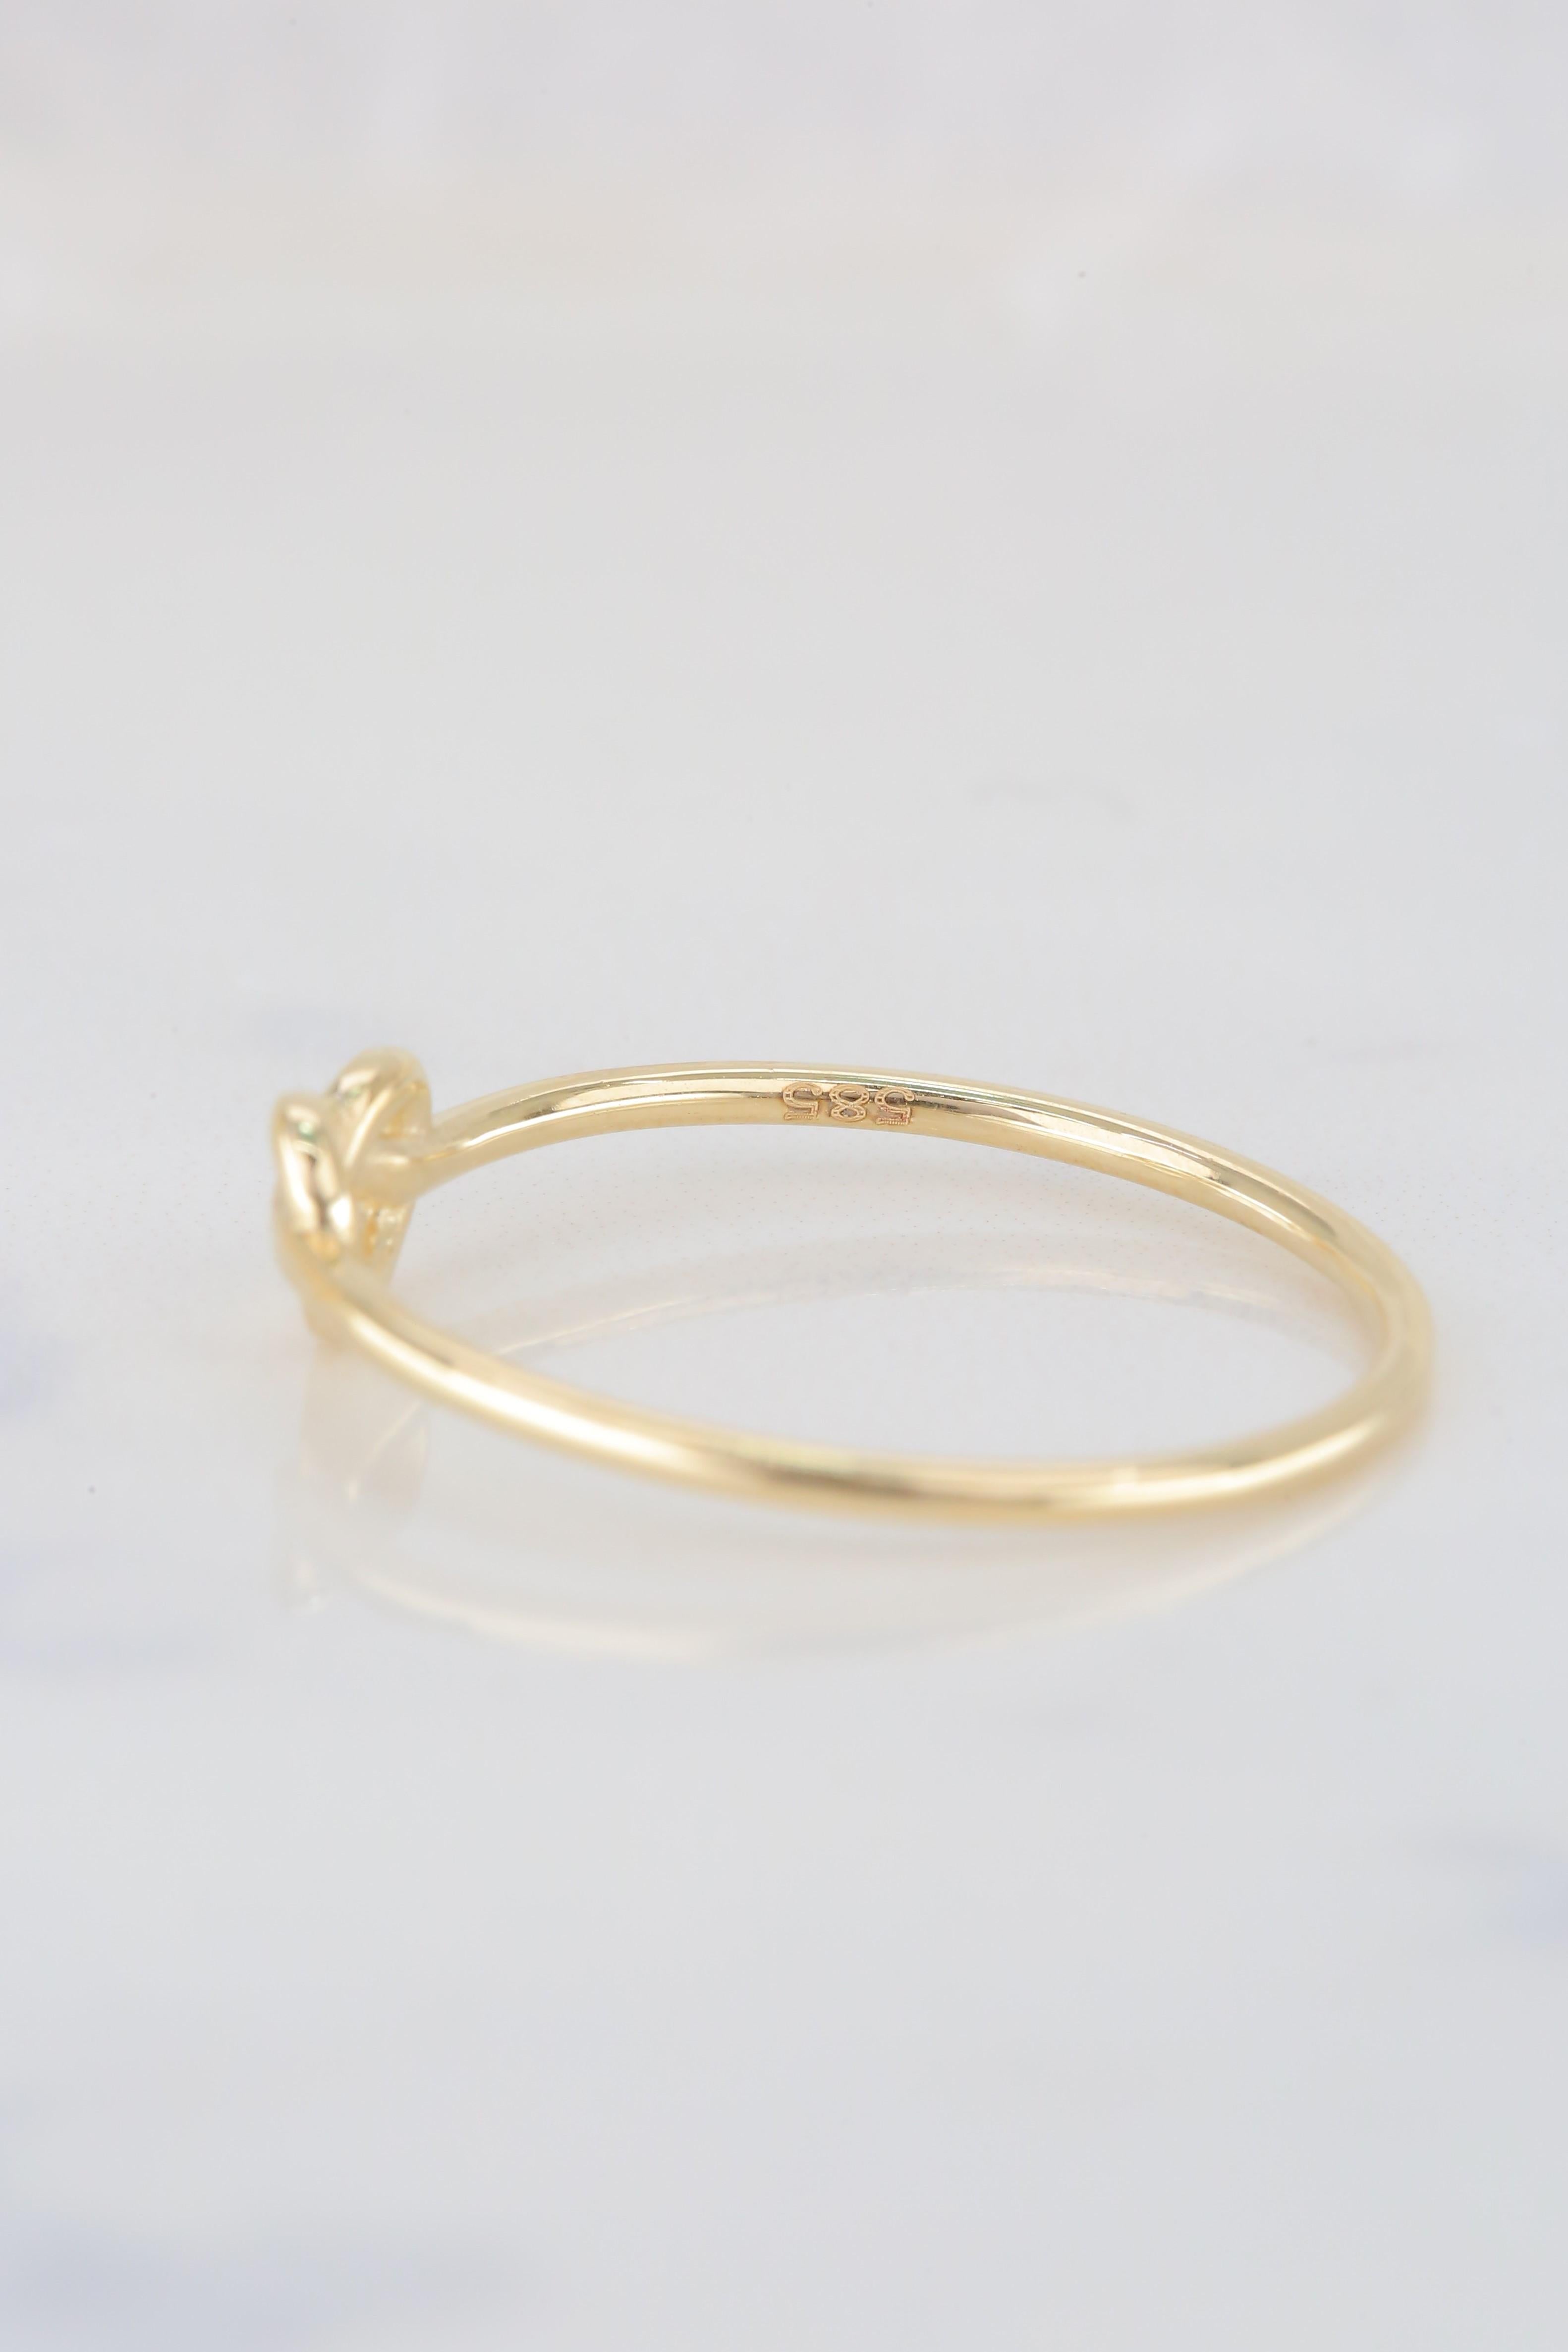 For Sale:  Gold Knot Ring, 14k Solid Gold, Dainty Ring, Minimalist Style Ring 7